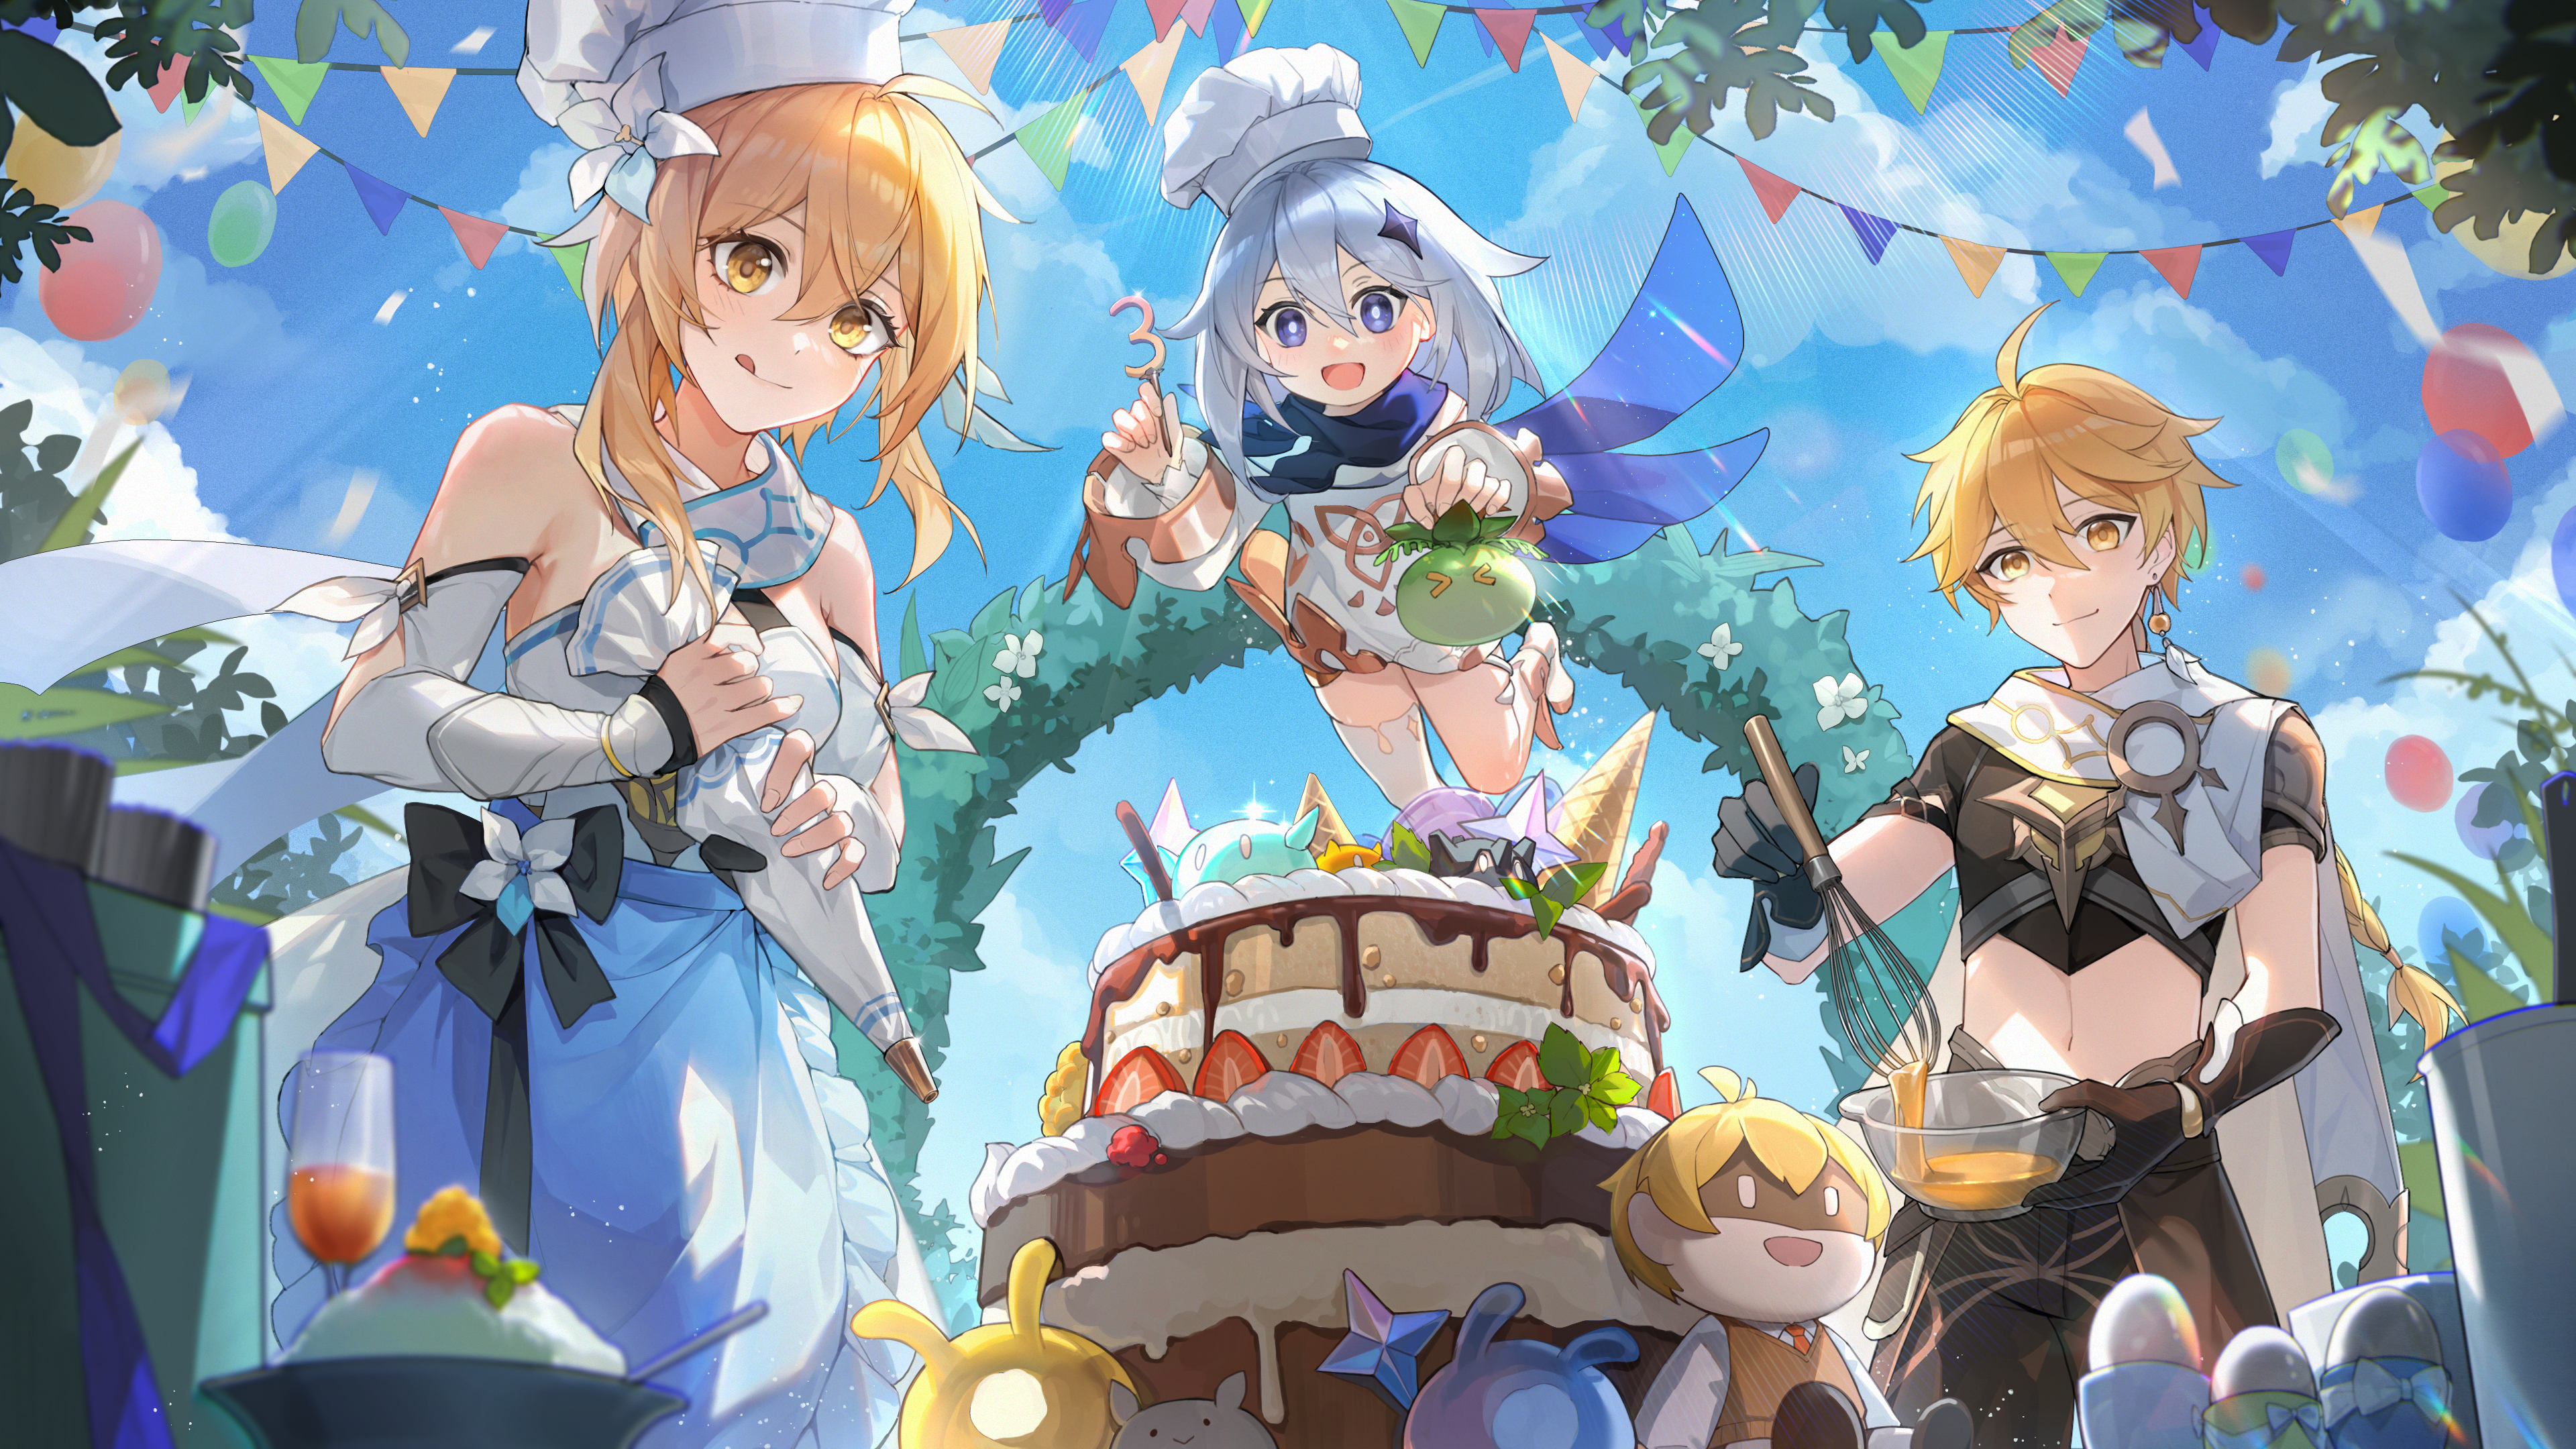 Anime 3840x2160 anime anime girls Lumine (Genshin Impact) Aether (Genshin Impact) Paimon (Genshin Impact) Genshin Impact cake plush toy clouds sky balloon chef's hat earring anime boys bowls whisk sunlight leaves party balloons anniversary tongue out flower in hair